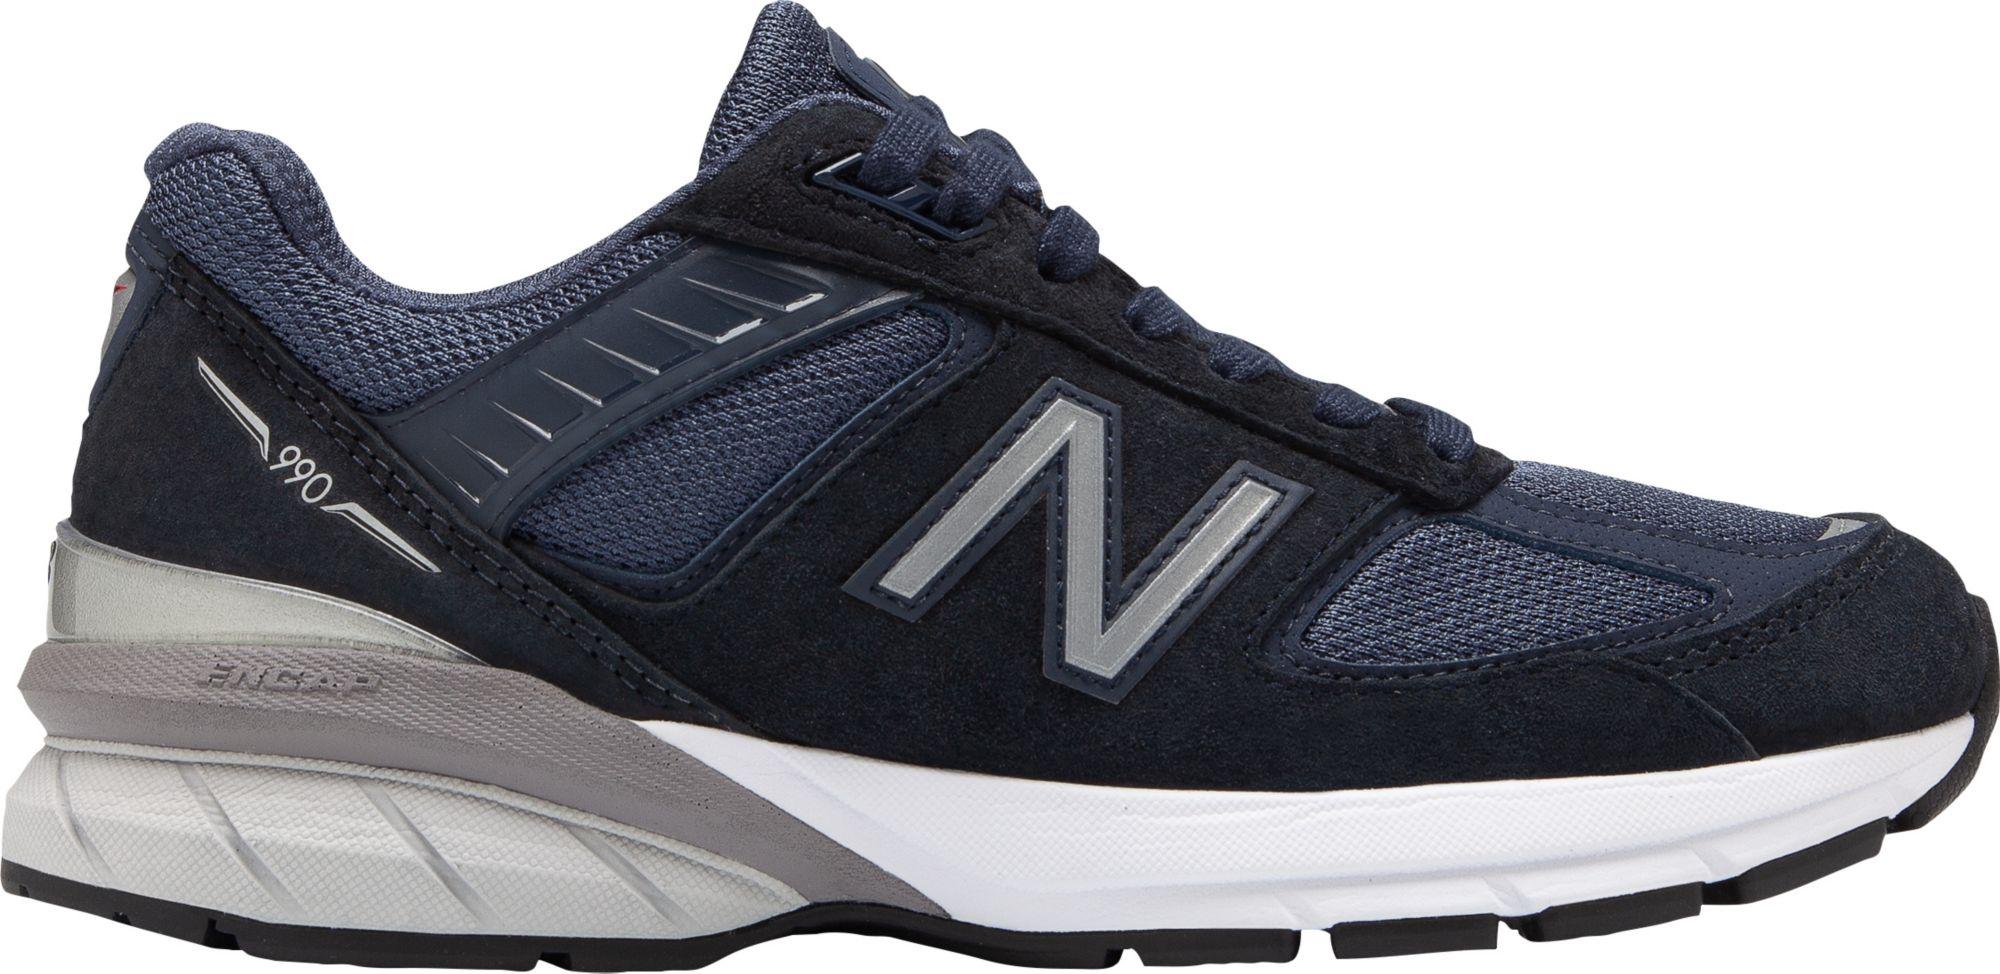 New Balance Suede 990v5 Shoes in Navy (Blue) - Lyst